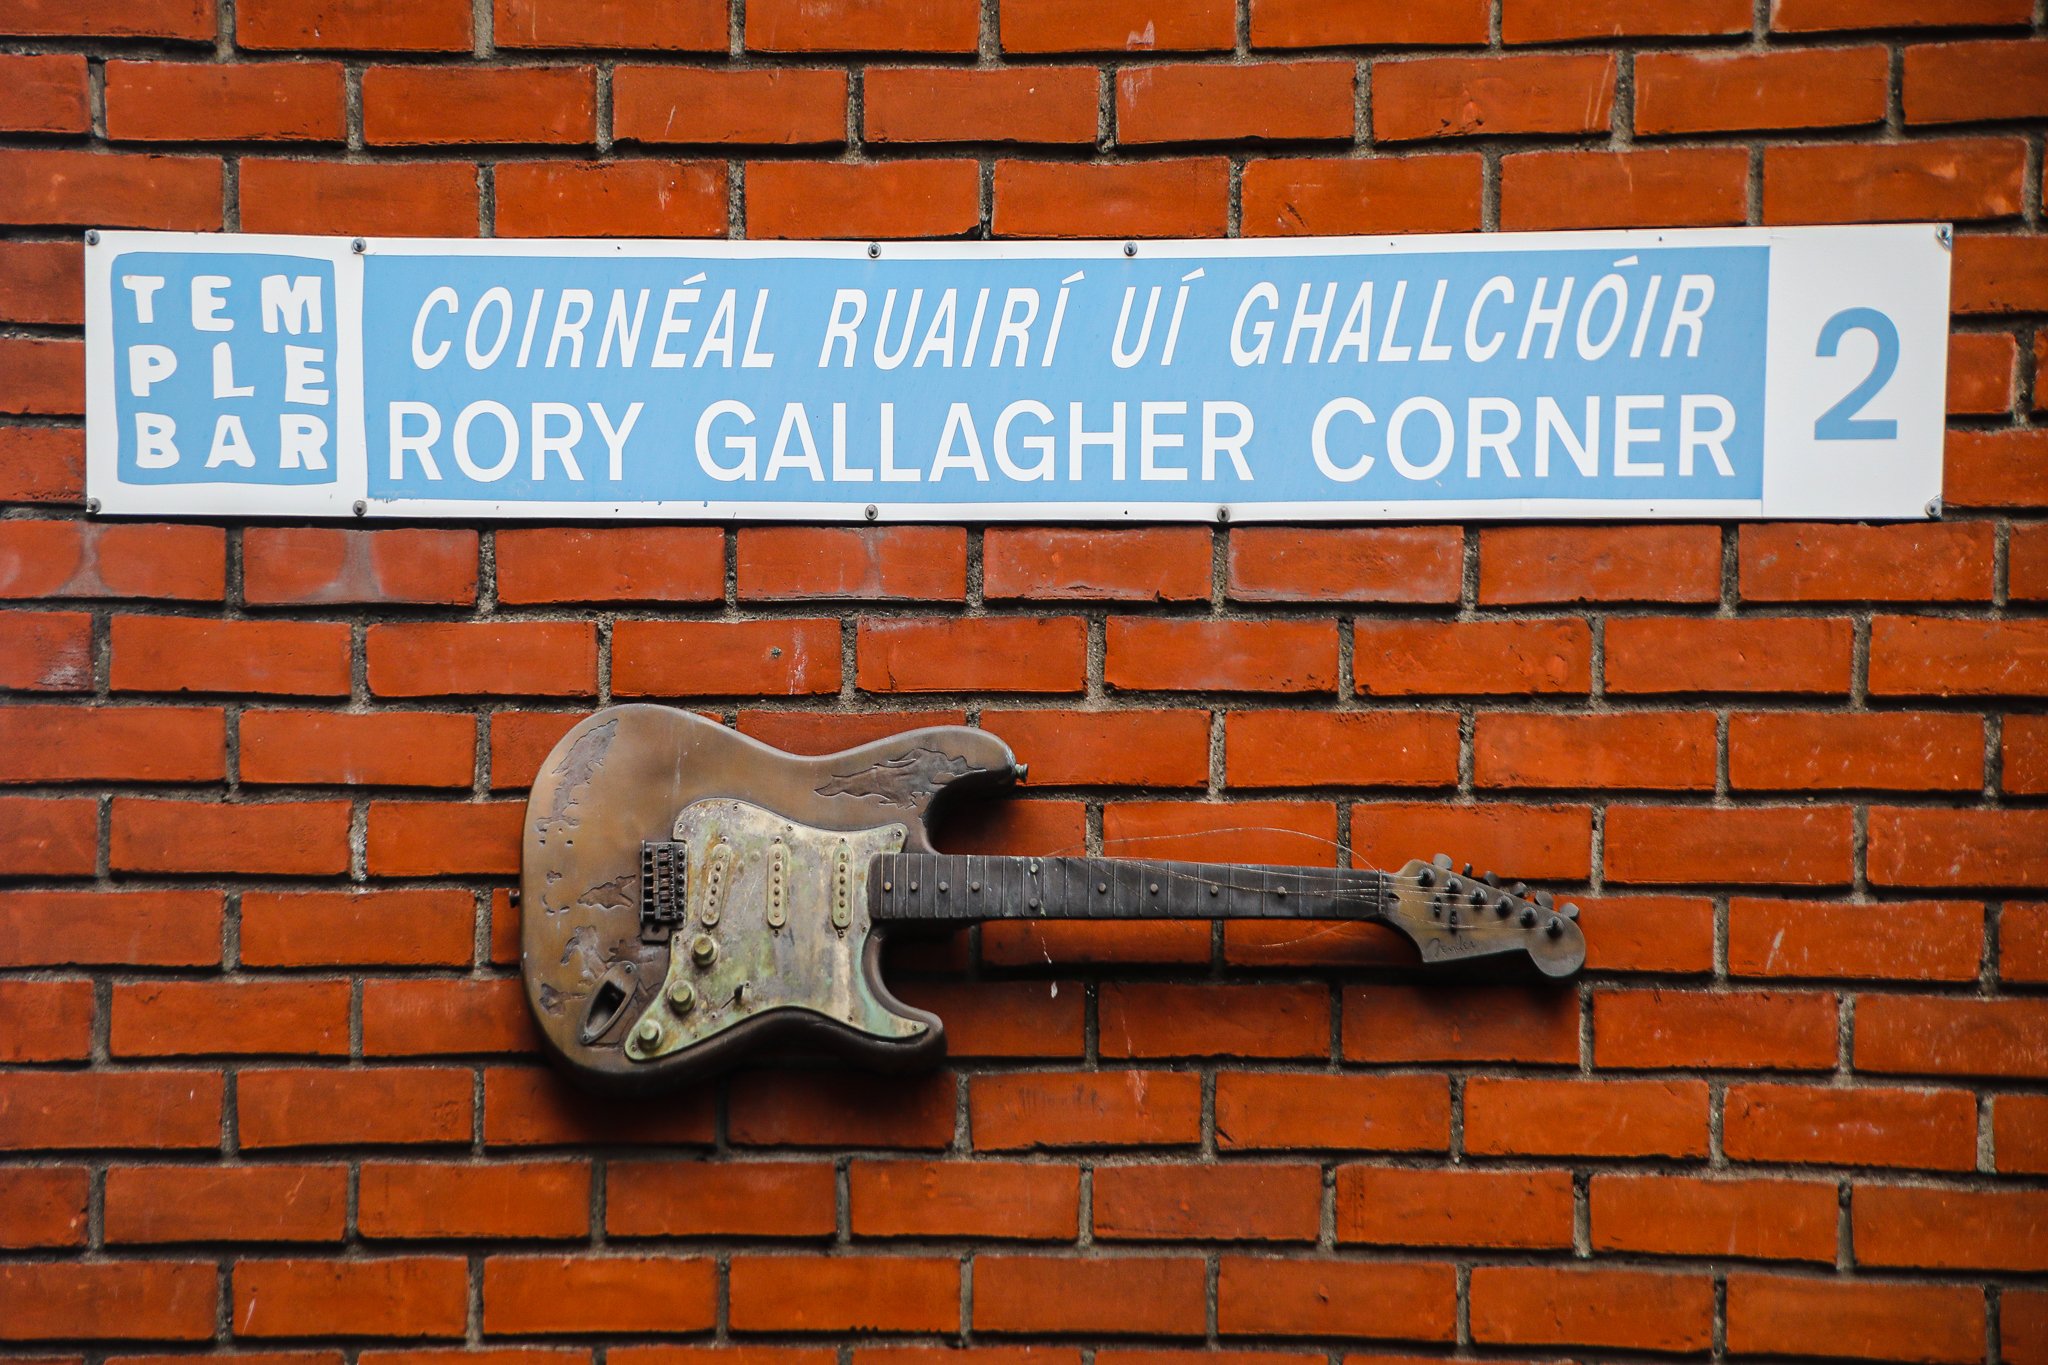 RoryGallagher2022-Small.jpg